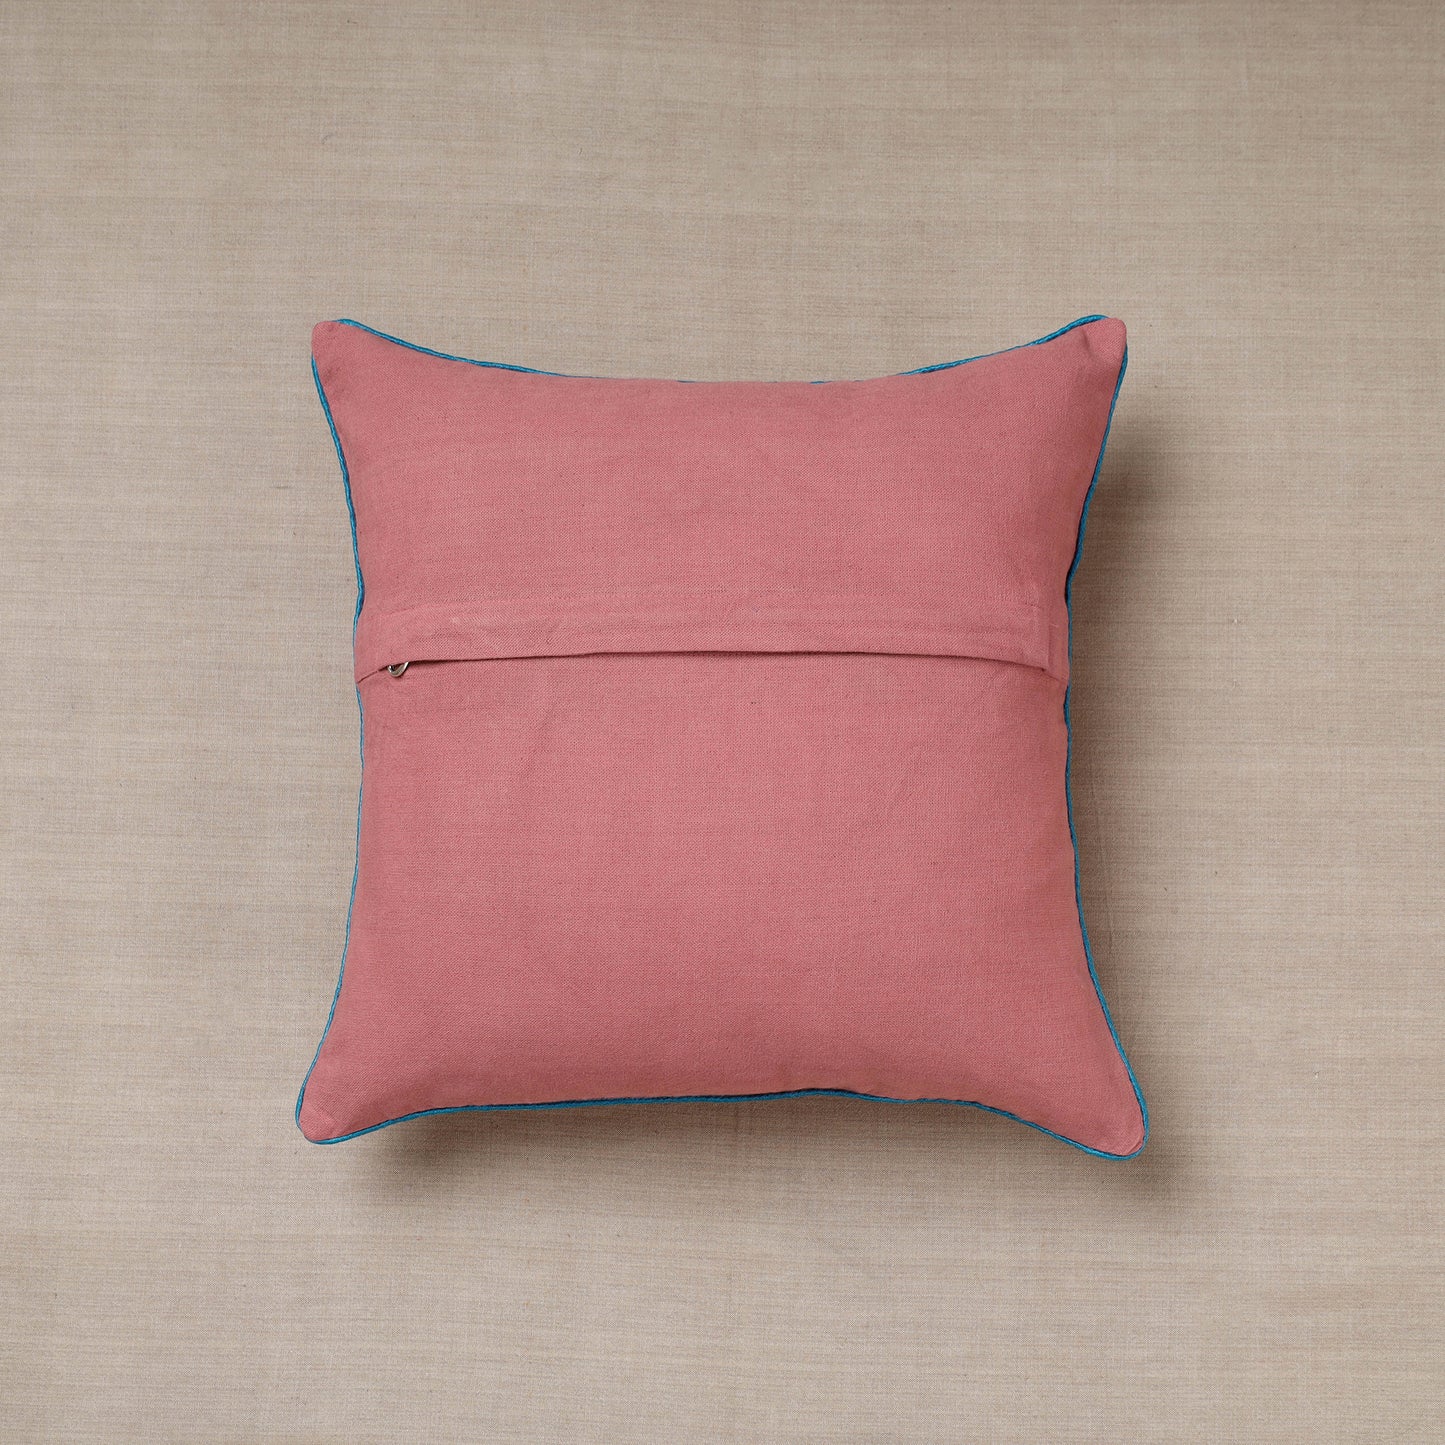 Peach - Soof Embroidery Cotton Cushion Cover (16 x 16 in)